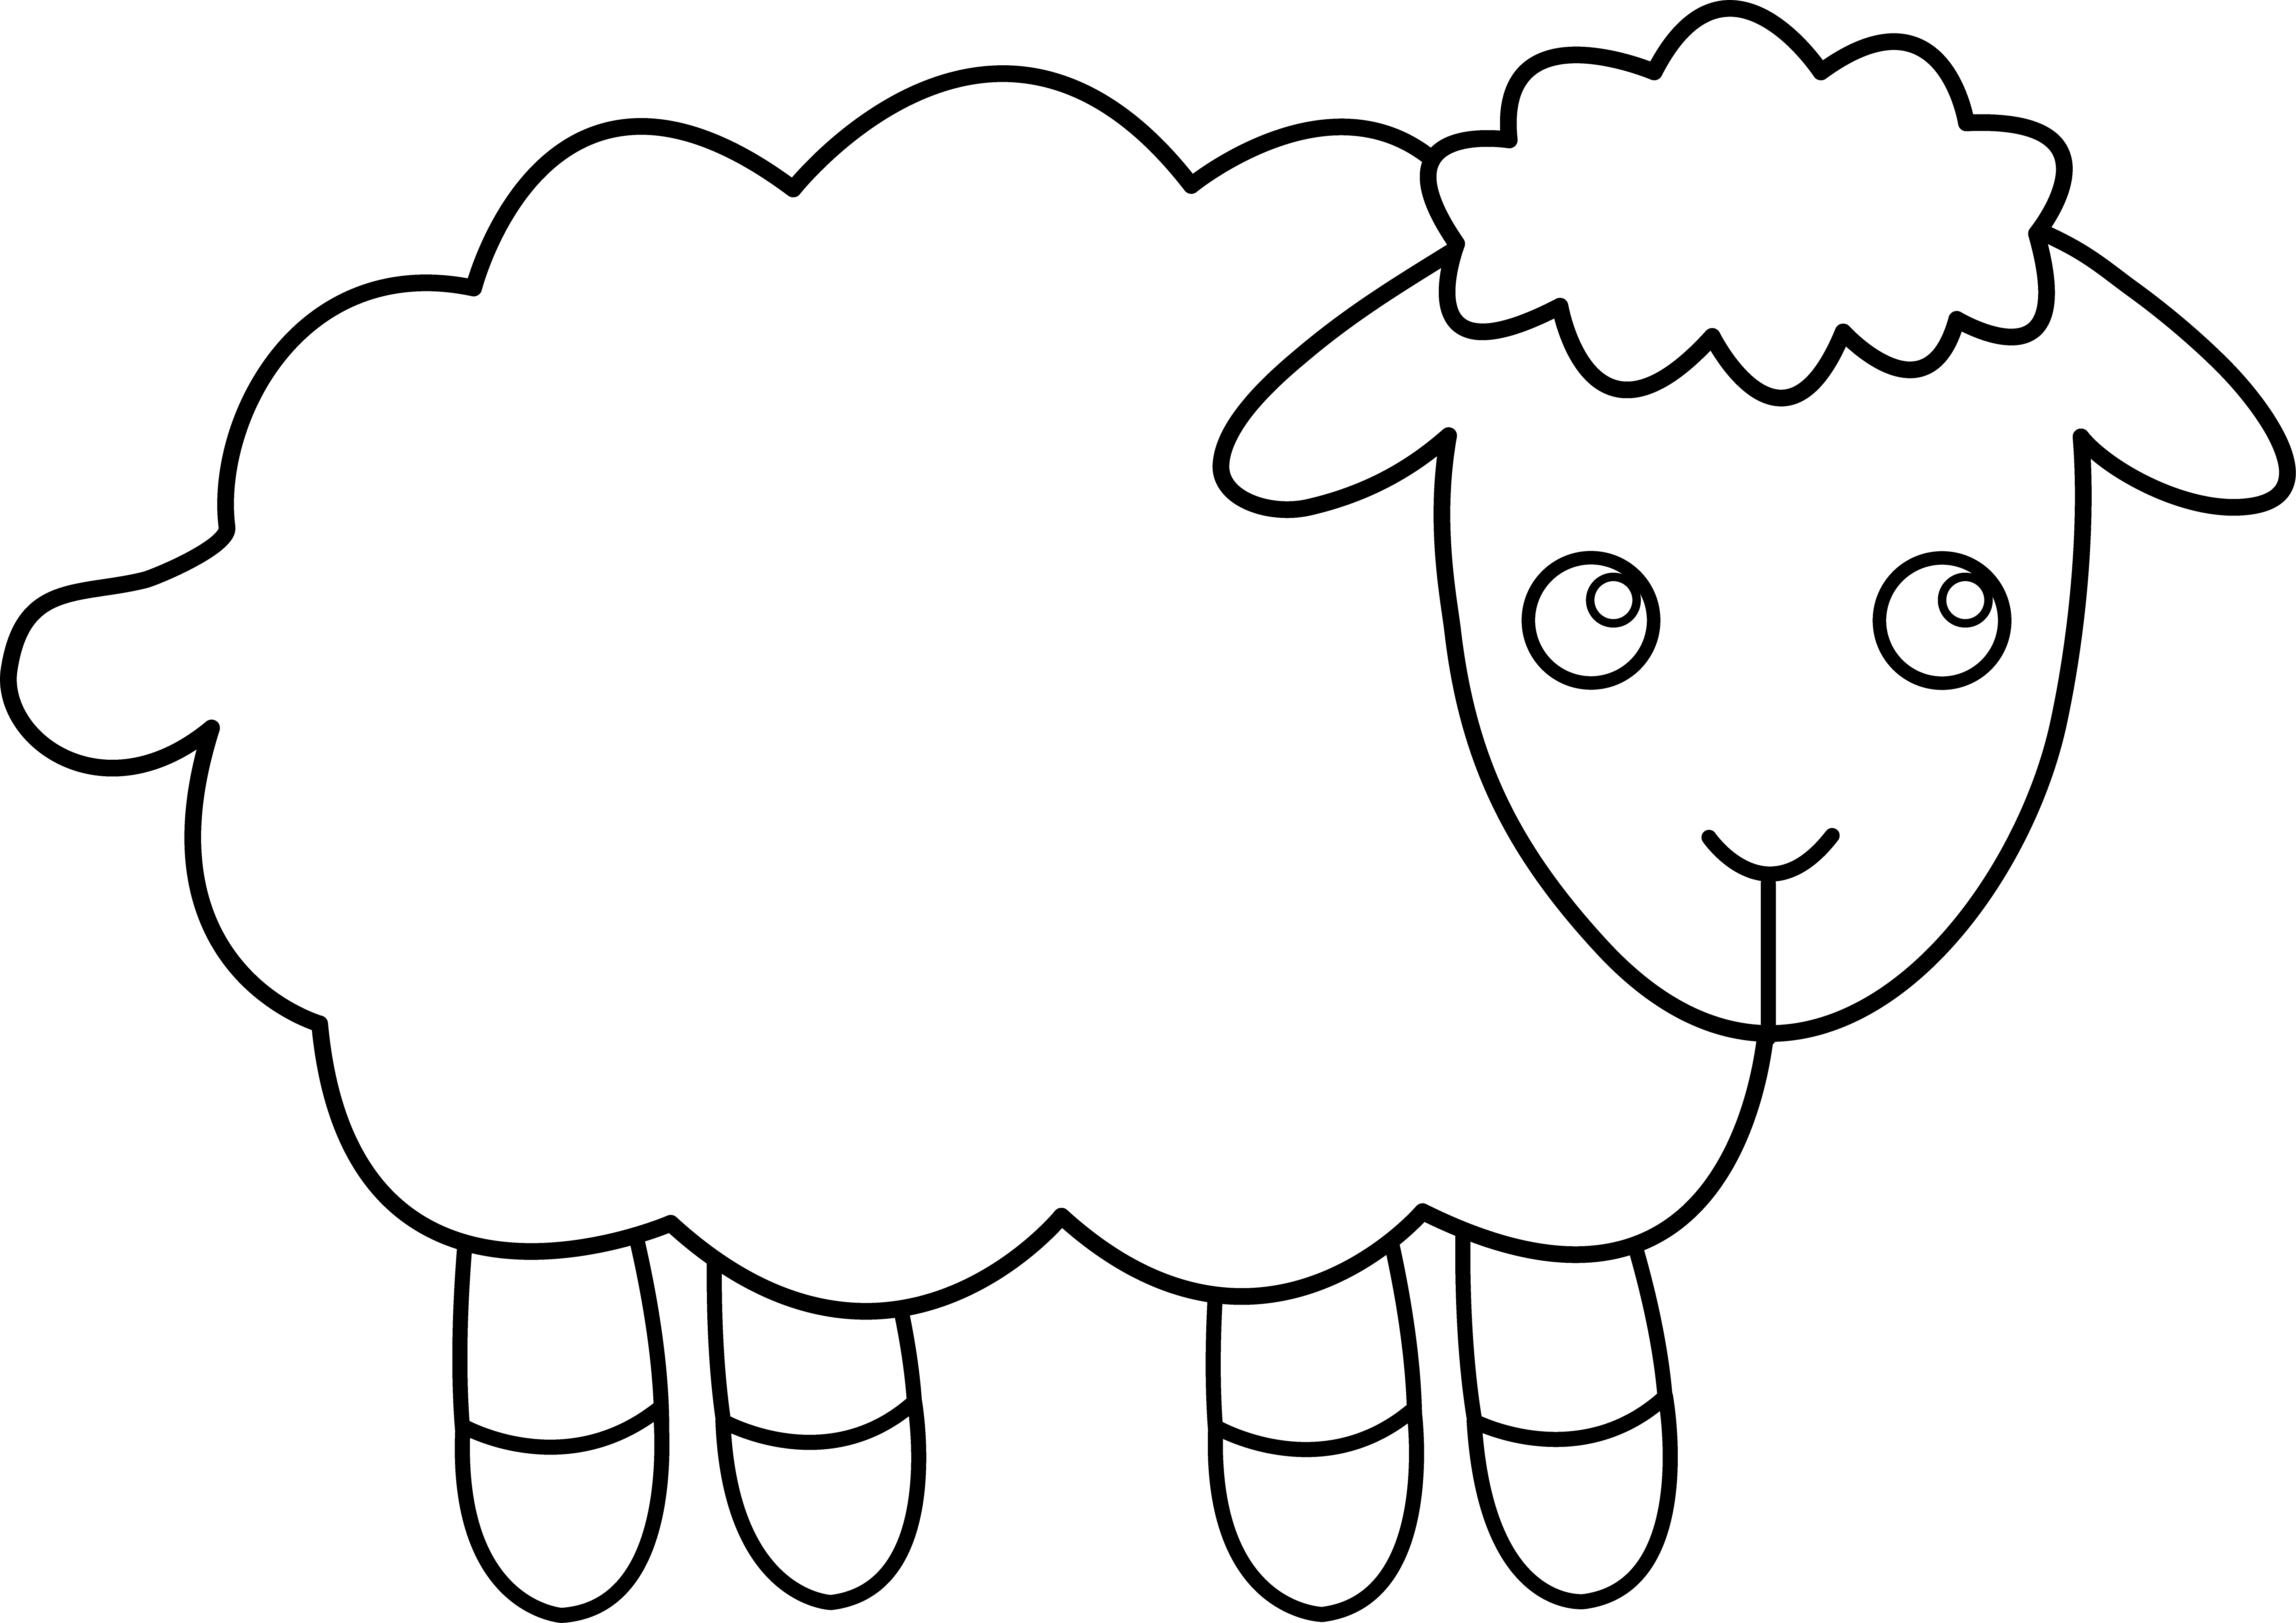 Lamb Face Clip Art | Clipart library - Free Clipart Images